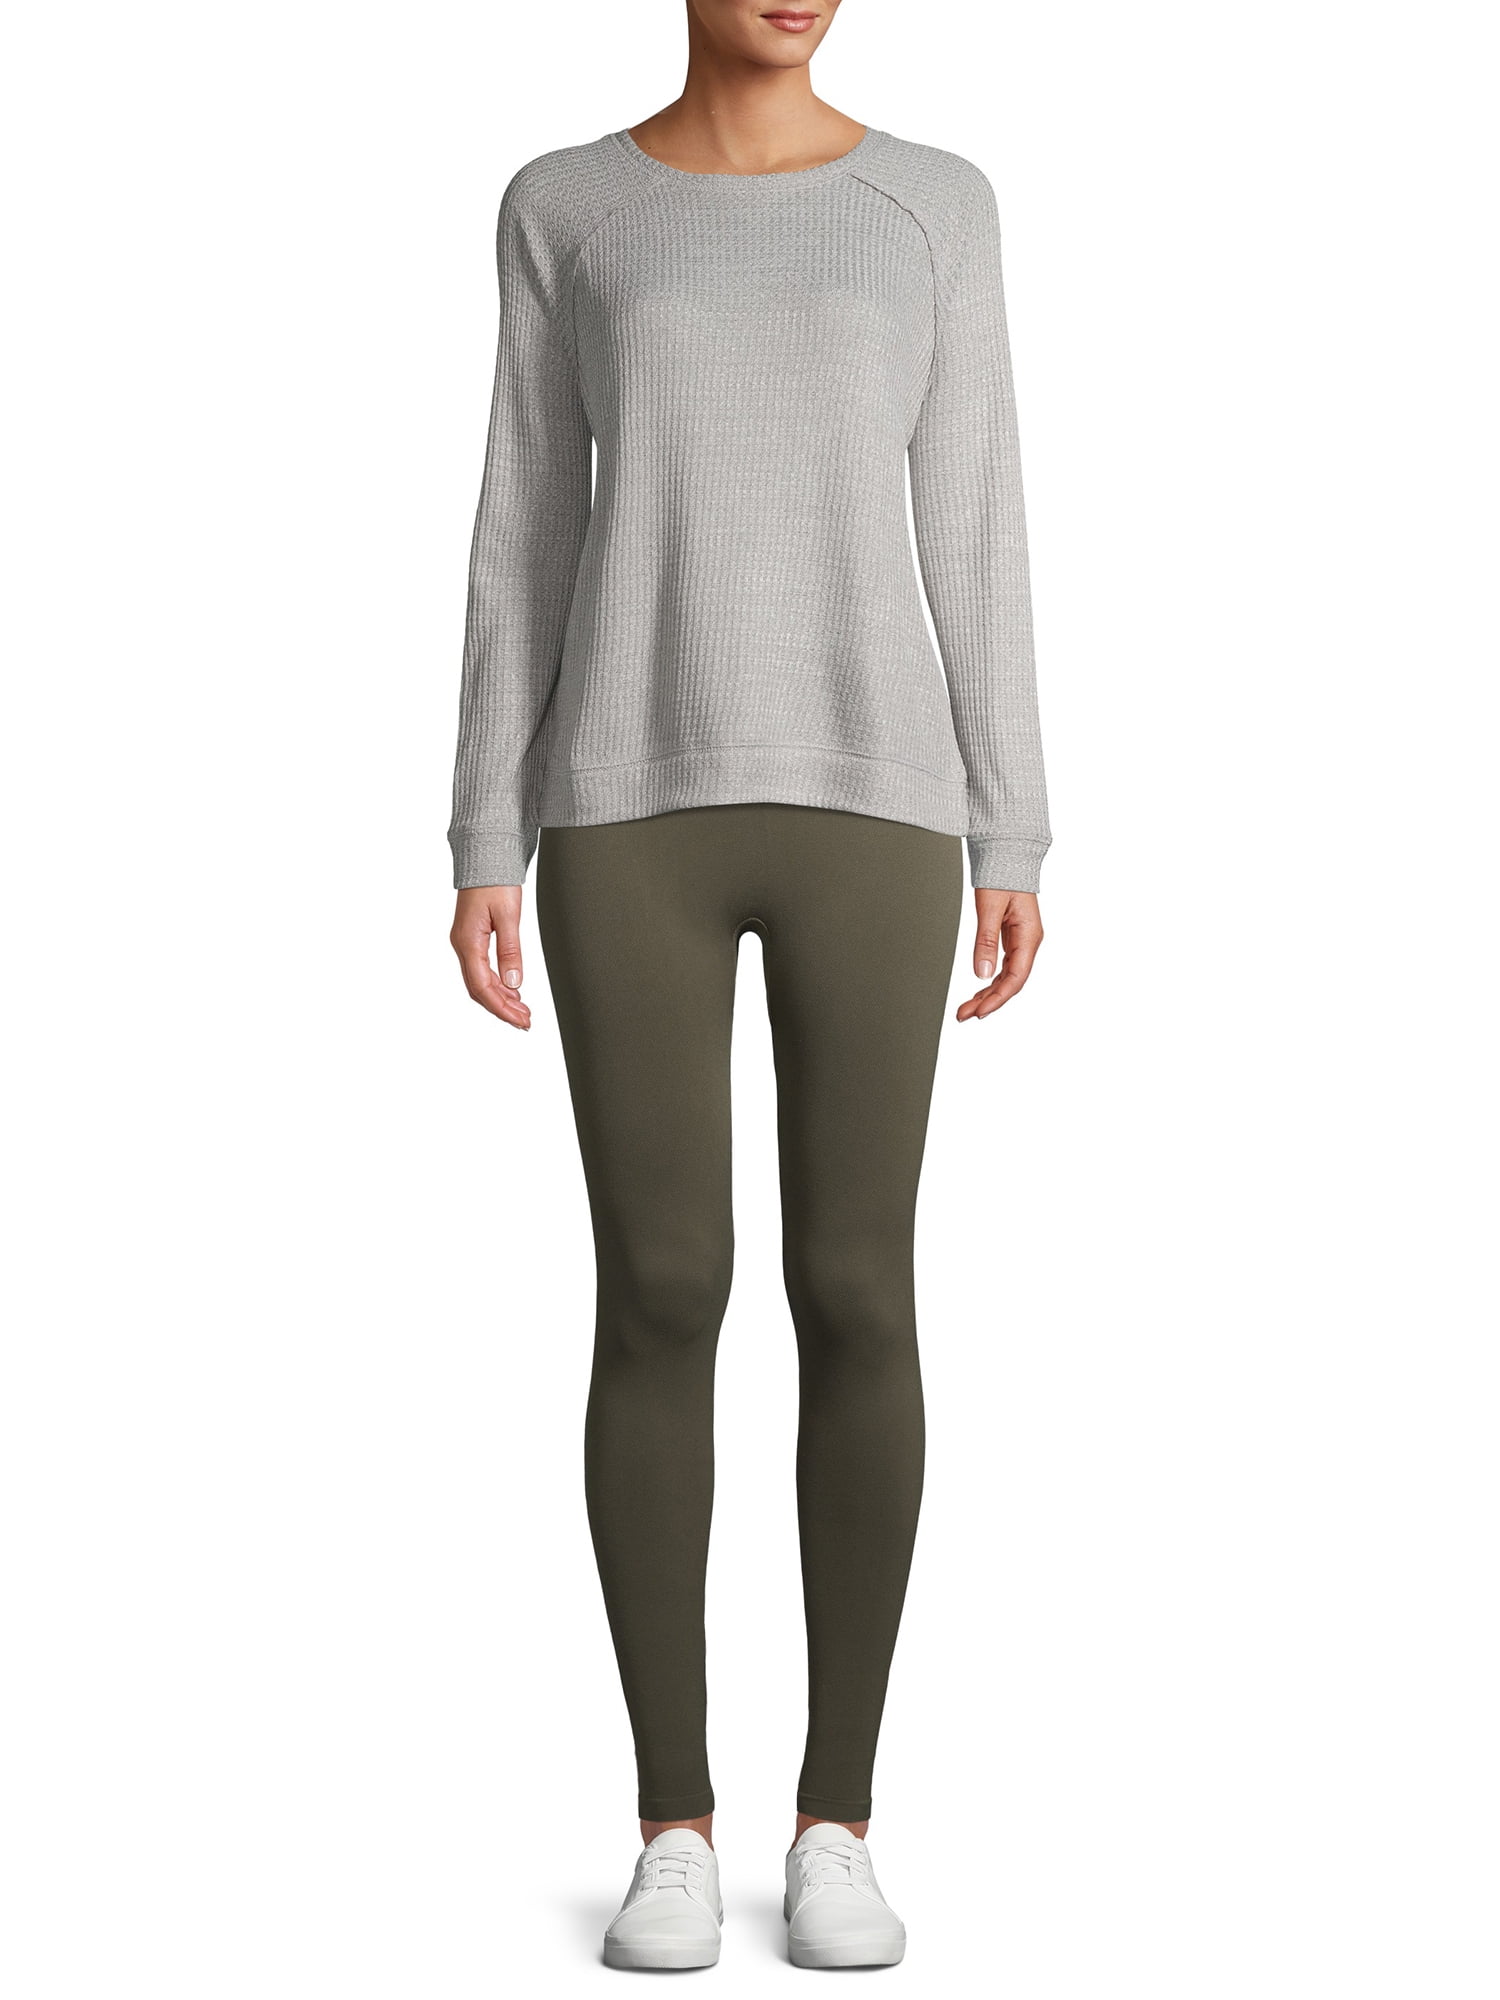 Guess Activewear Trudy Seamless Legging 4/4 – leggings & tights